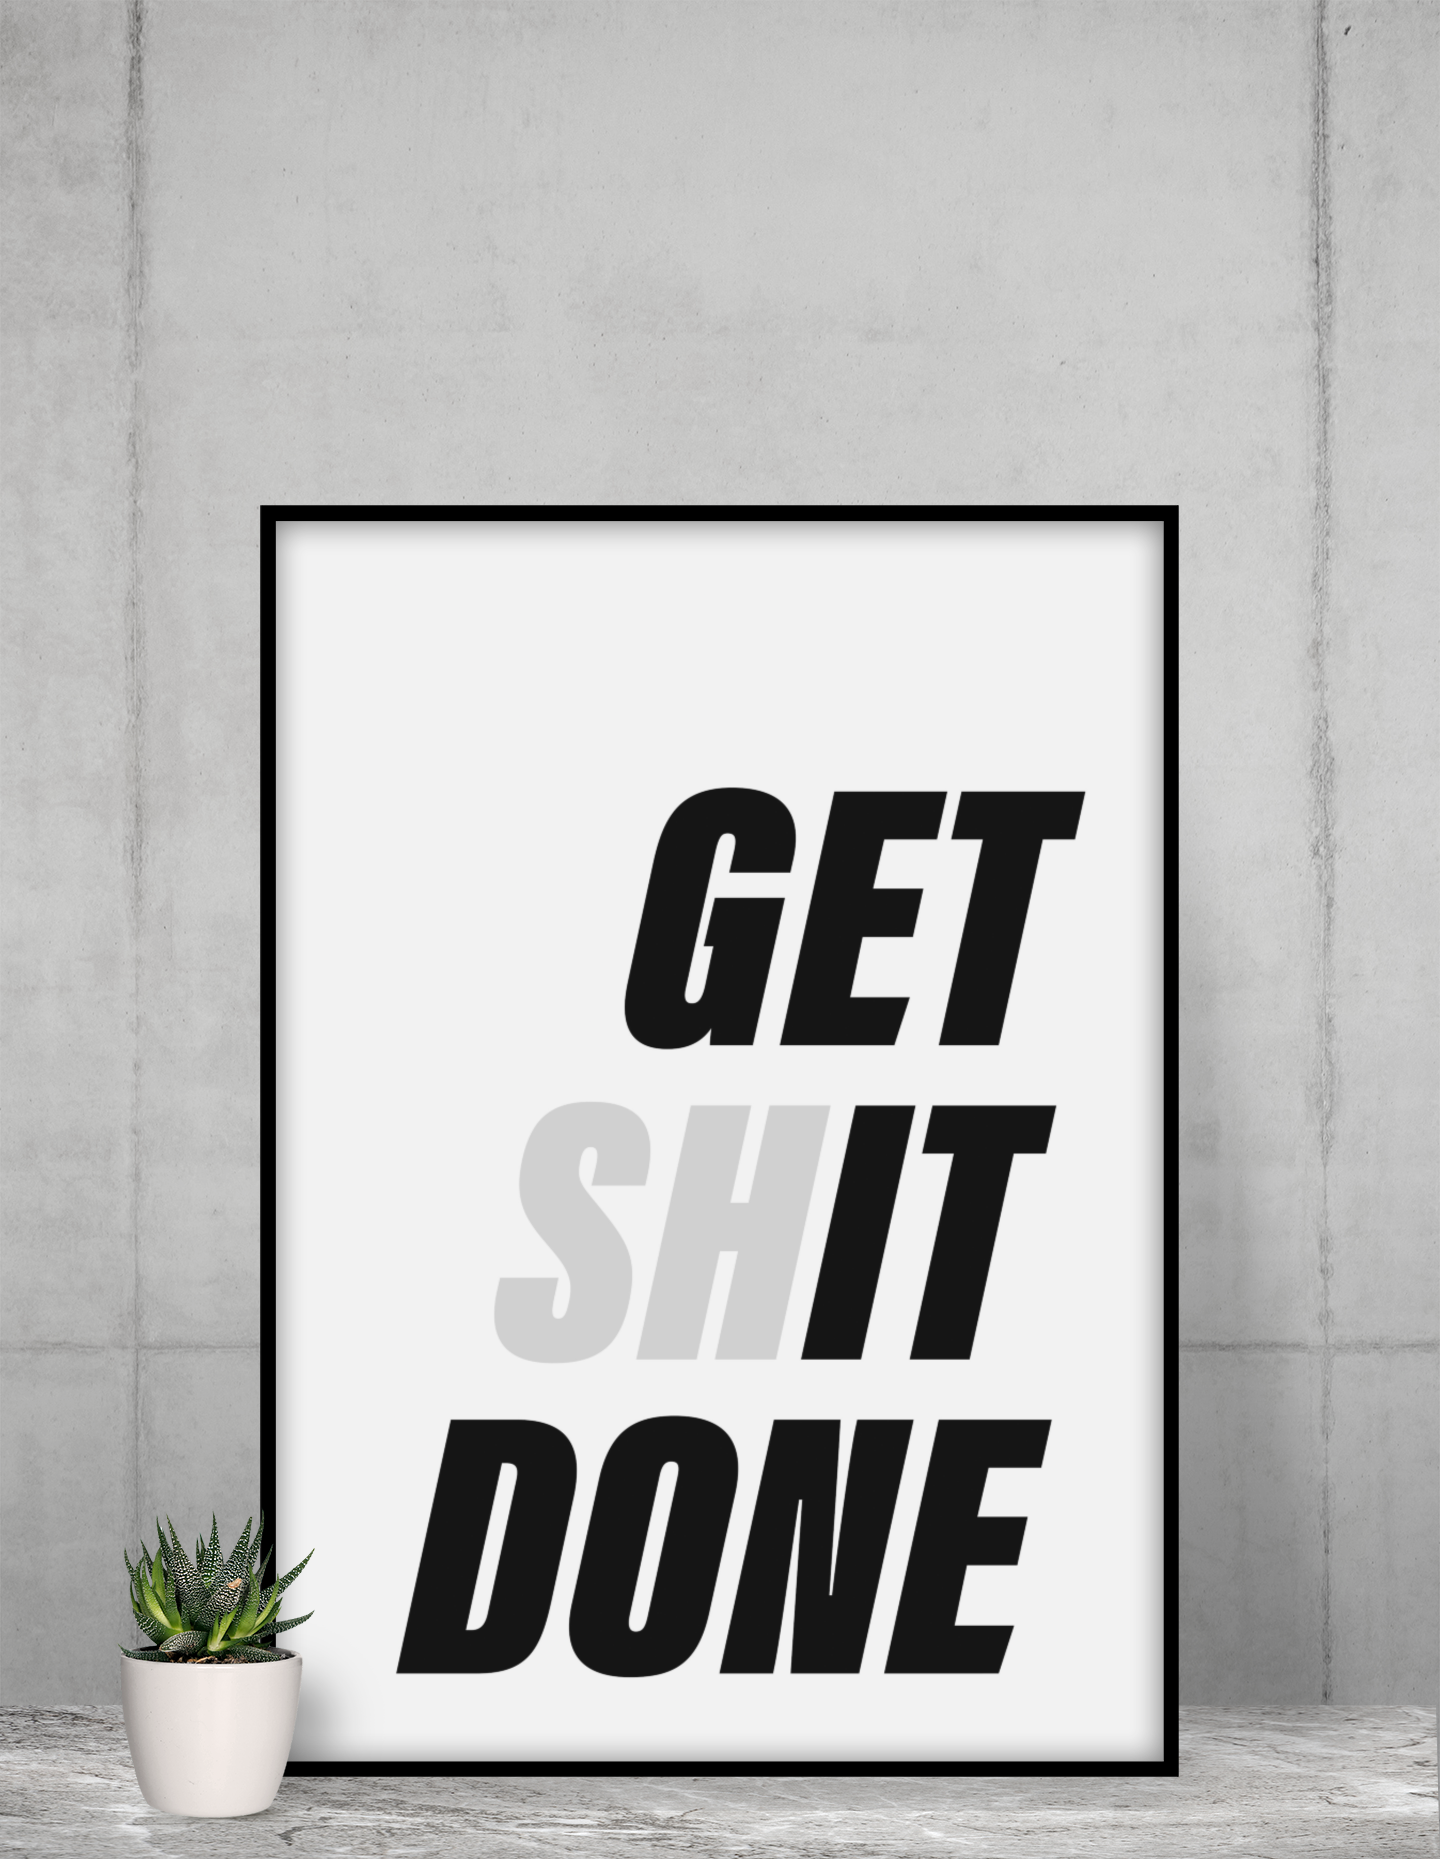 Get It Done - Motivational Poster Print – Gift, Typography, Quote